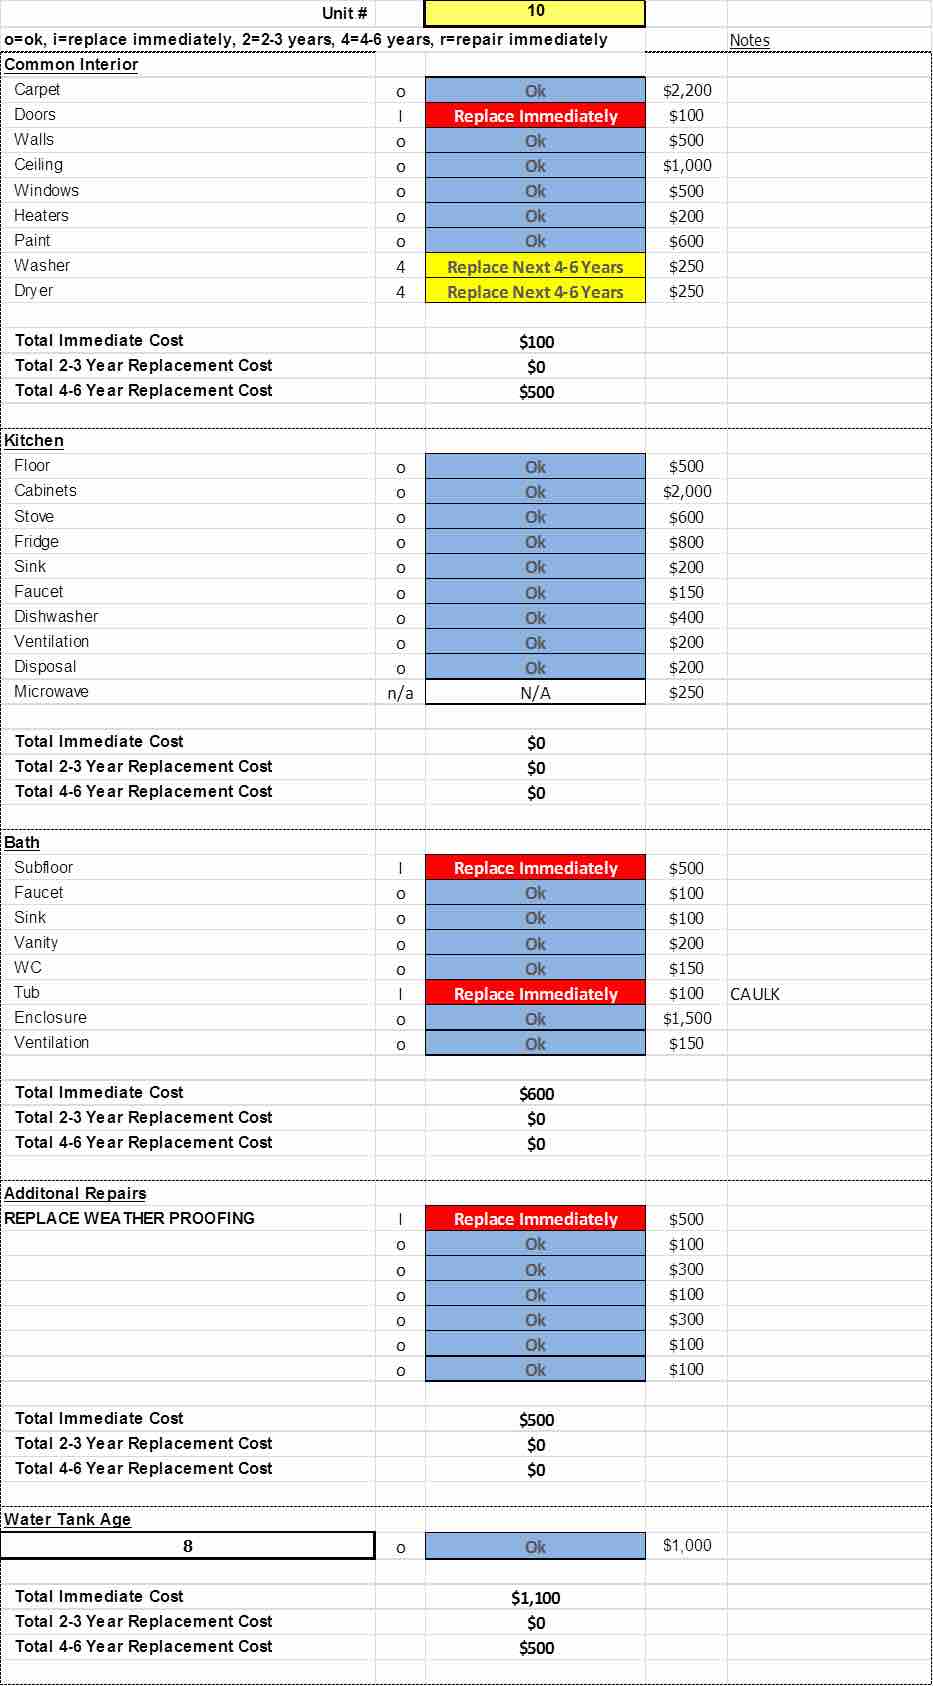 Example of a multi-family home report spreadsheet.